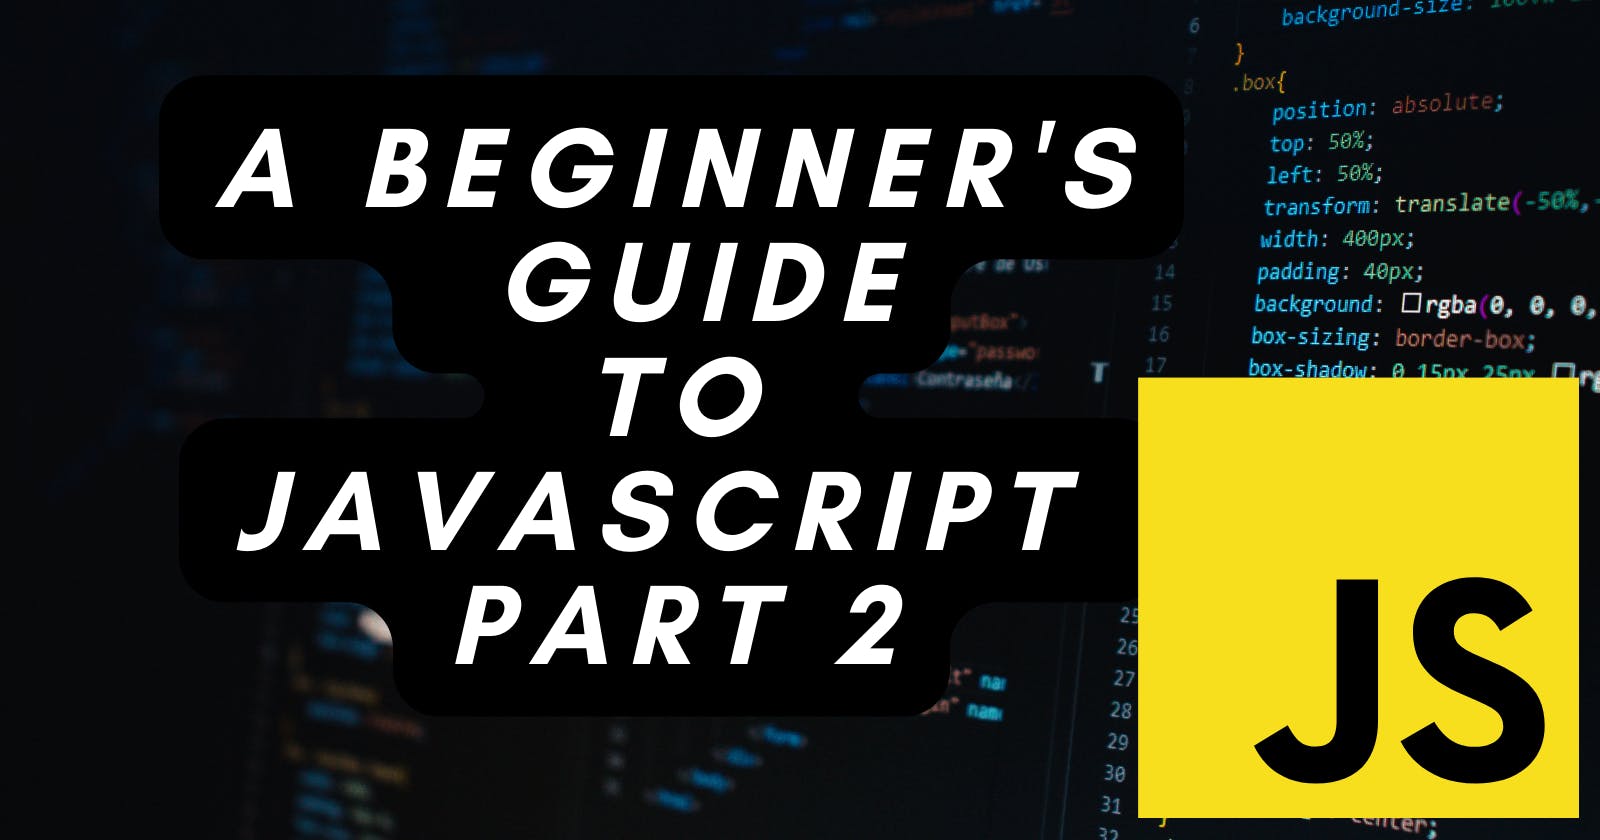 A Beginner's Guide to JavaScript Part 2